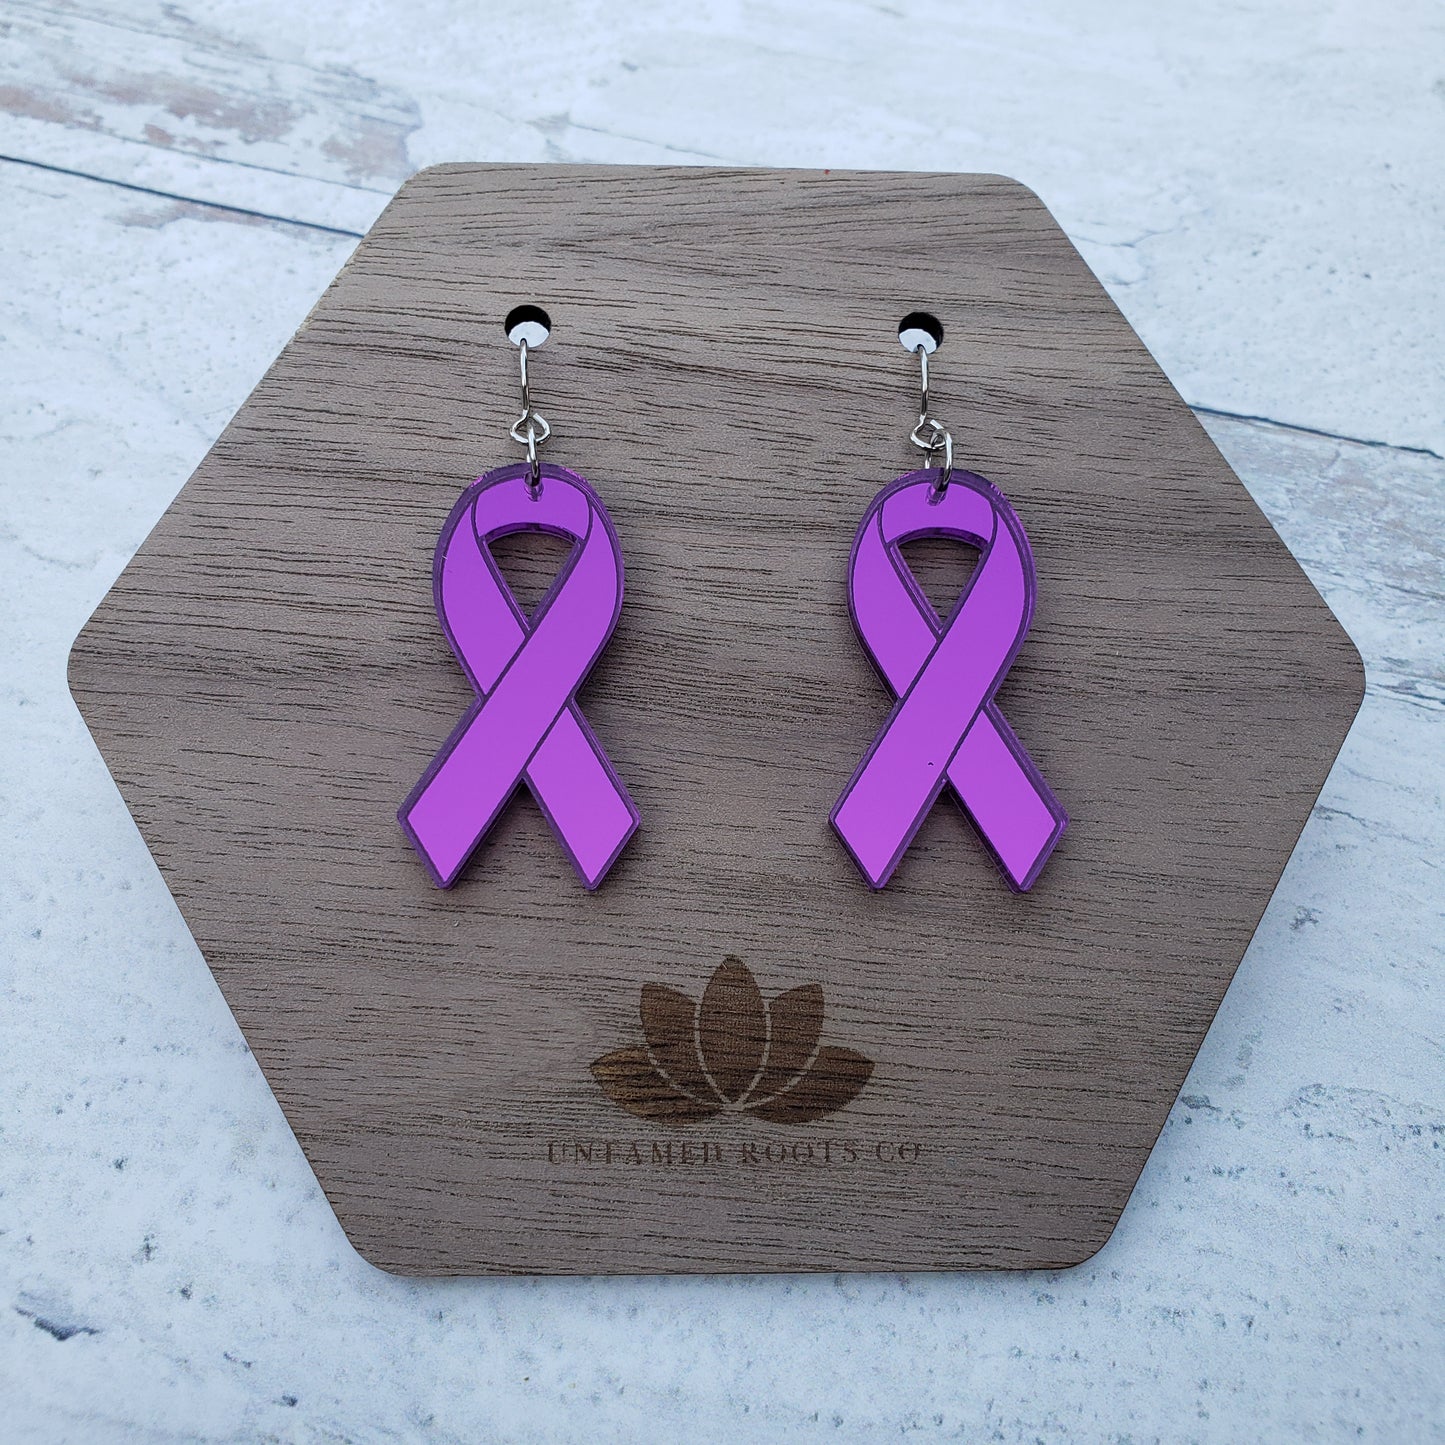 Classic purple mirror acrylic awareness ribbons on stainless steel earring wires.